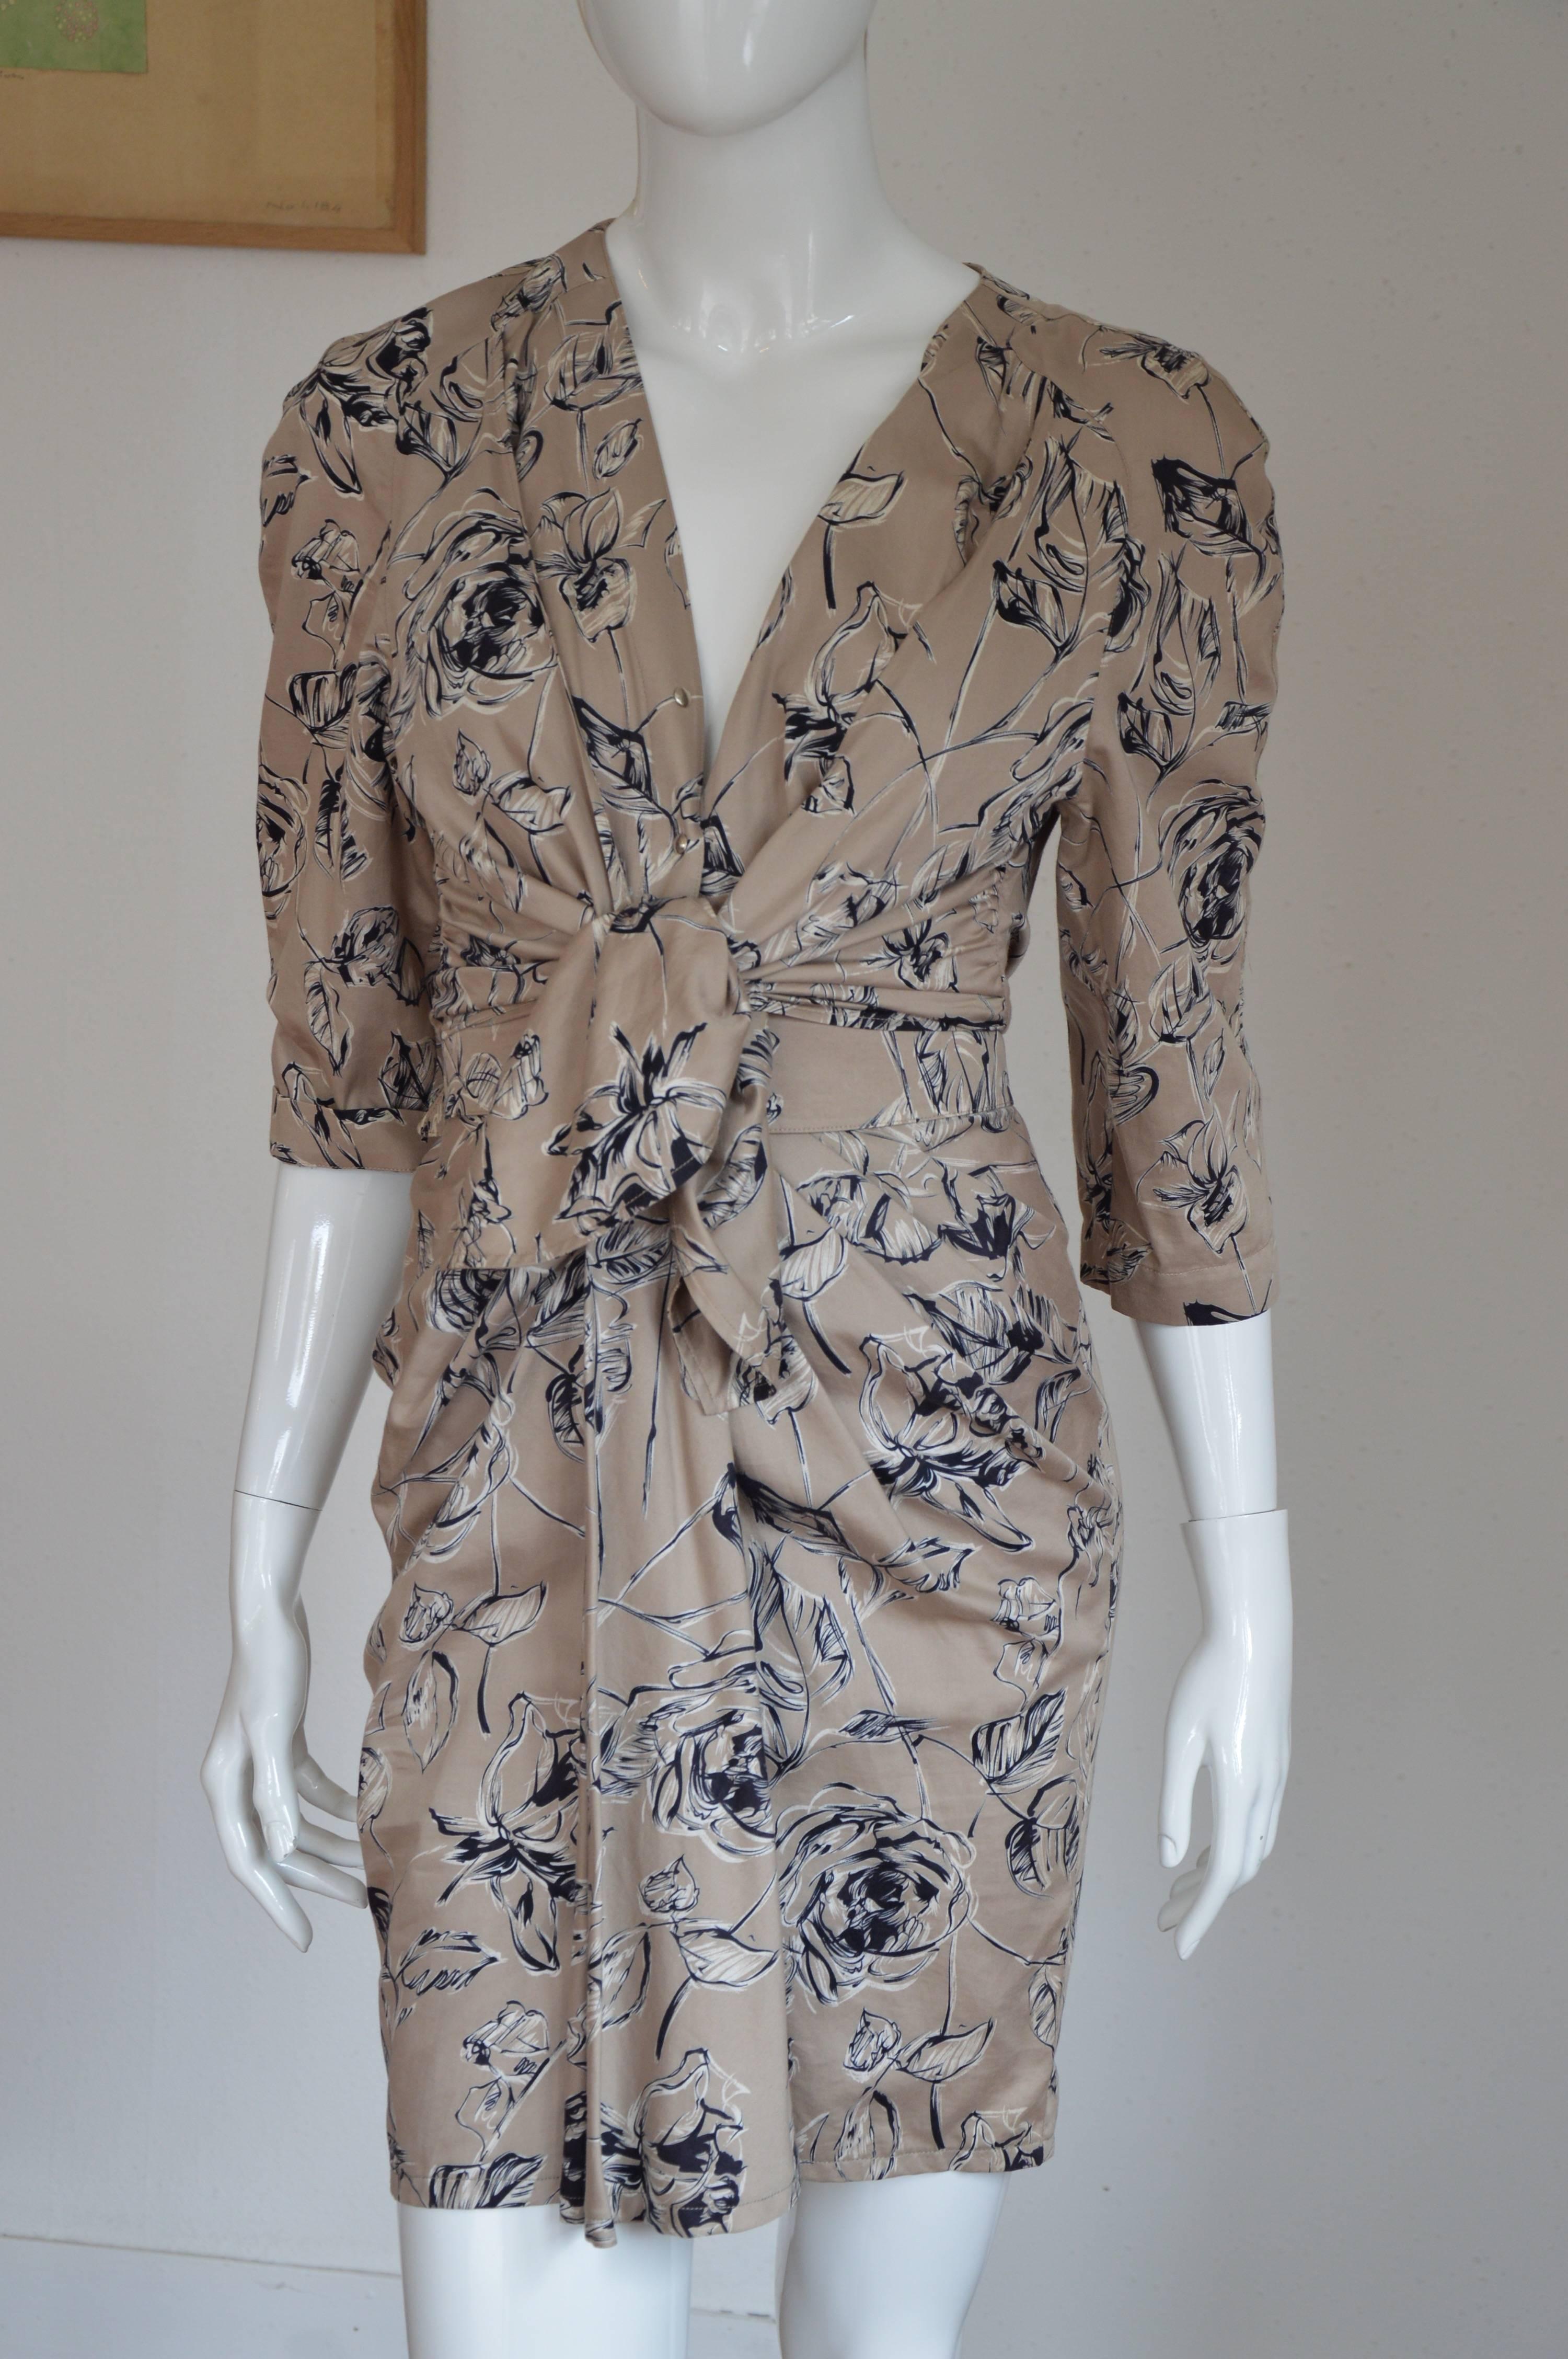 Exquisite Thierry Mugler romantic black and white roses motif on a beige cotton fitted dinner dress.
XS